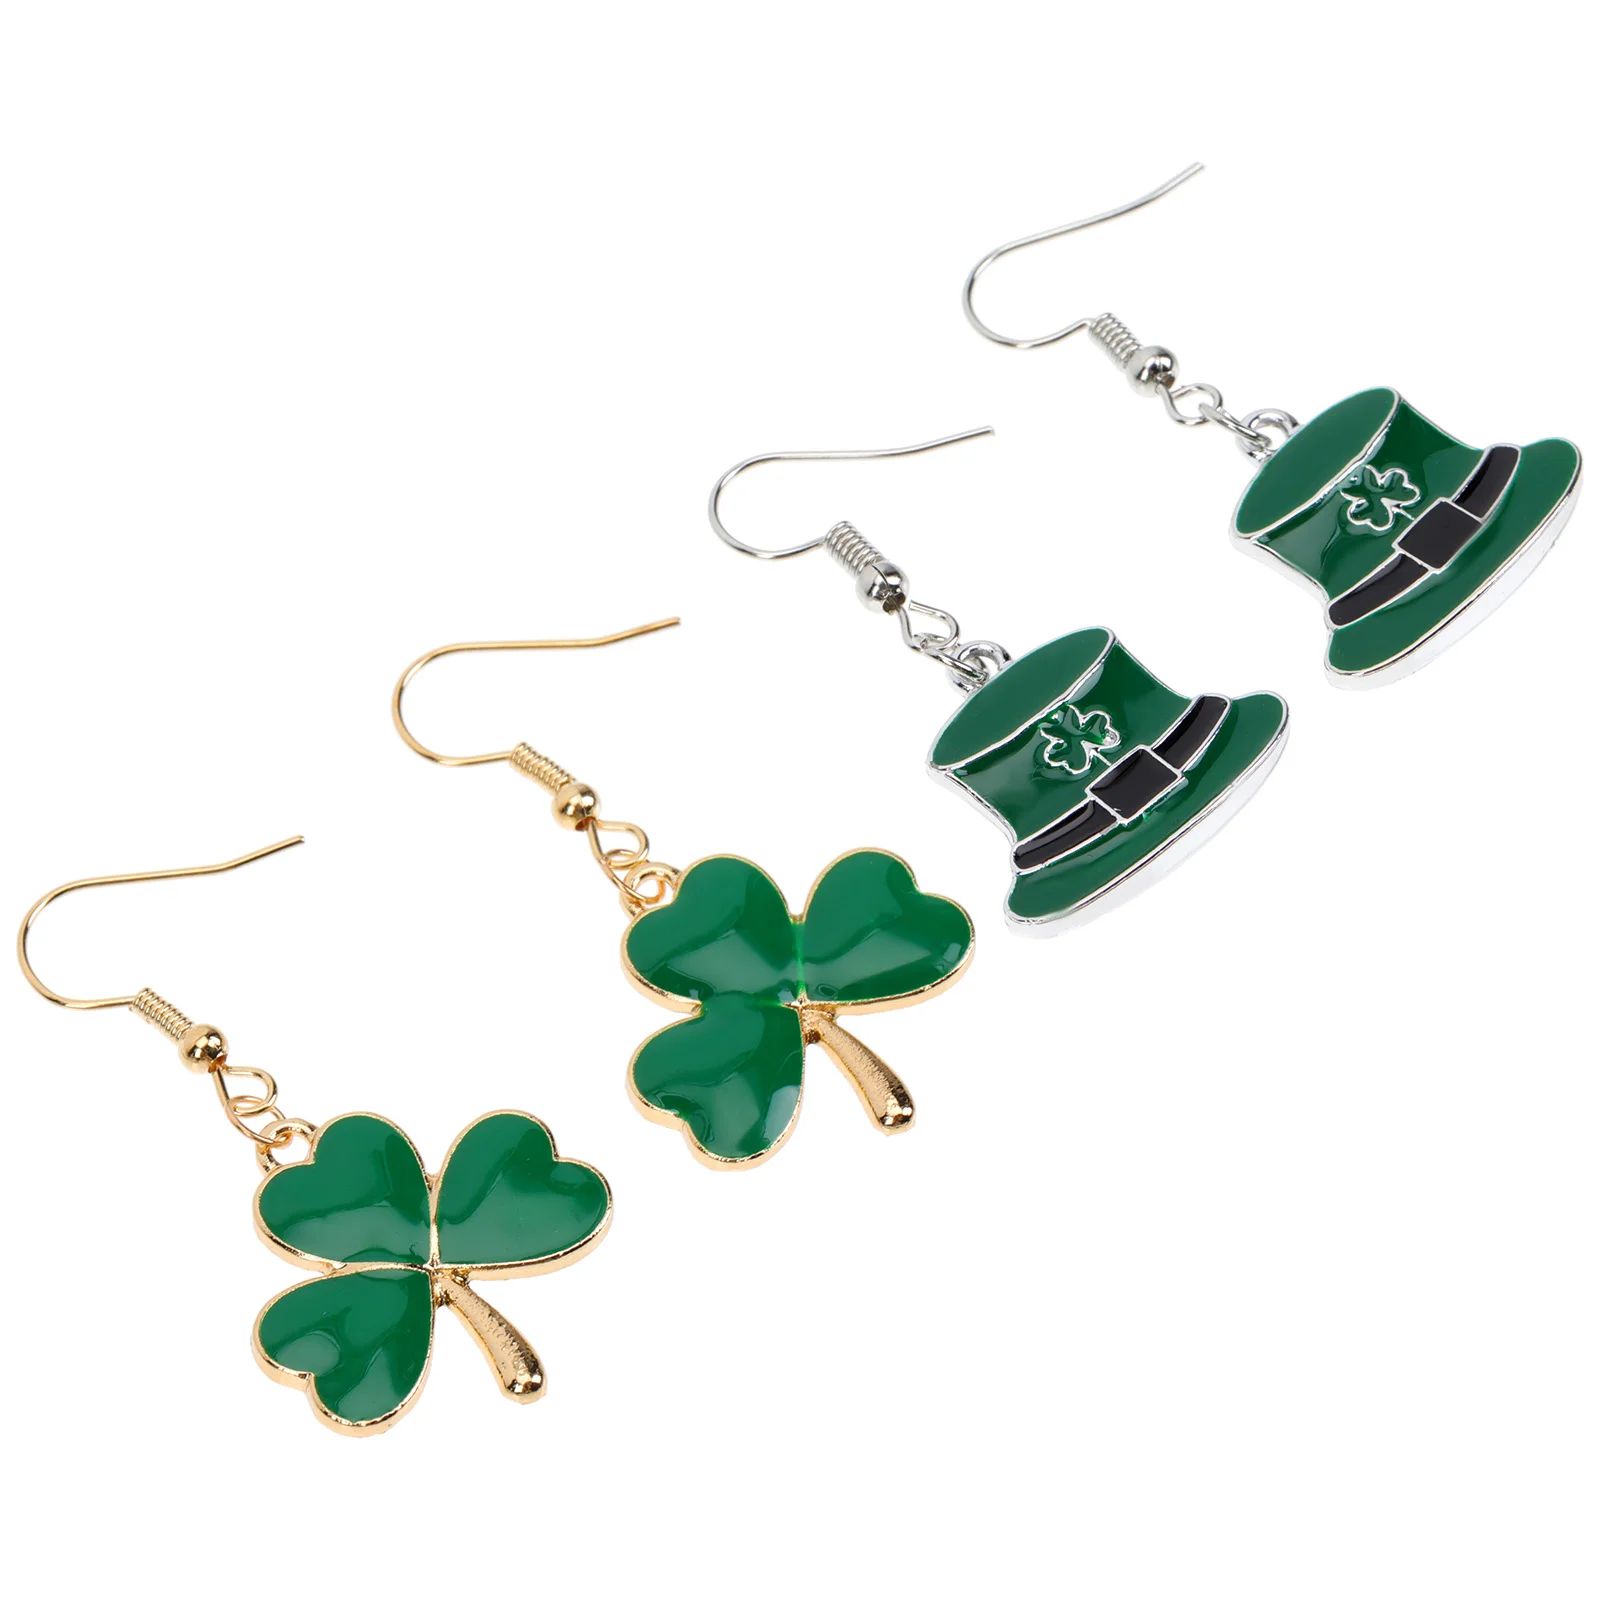 

Day Ear Patrick S Earrings Patricks St Shamrock Party Dangle Delicate Favor Jewelry Green Stud Studs Favors Gifts Themed Shaped